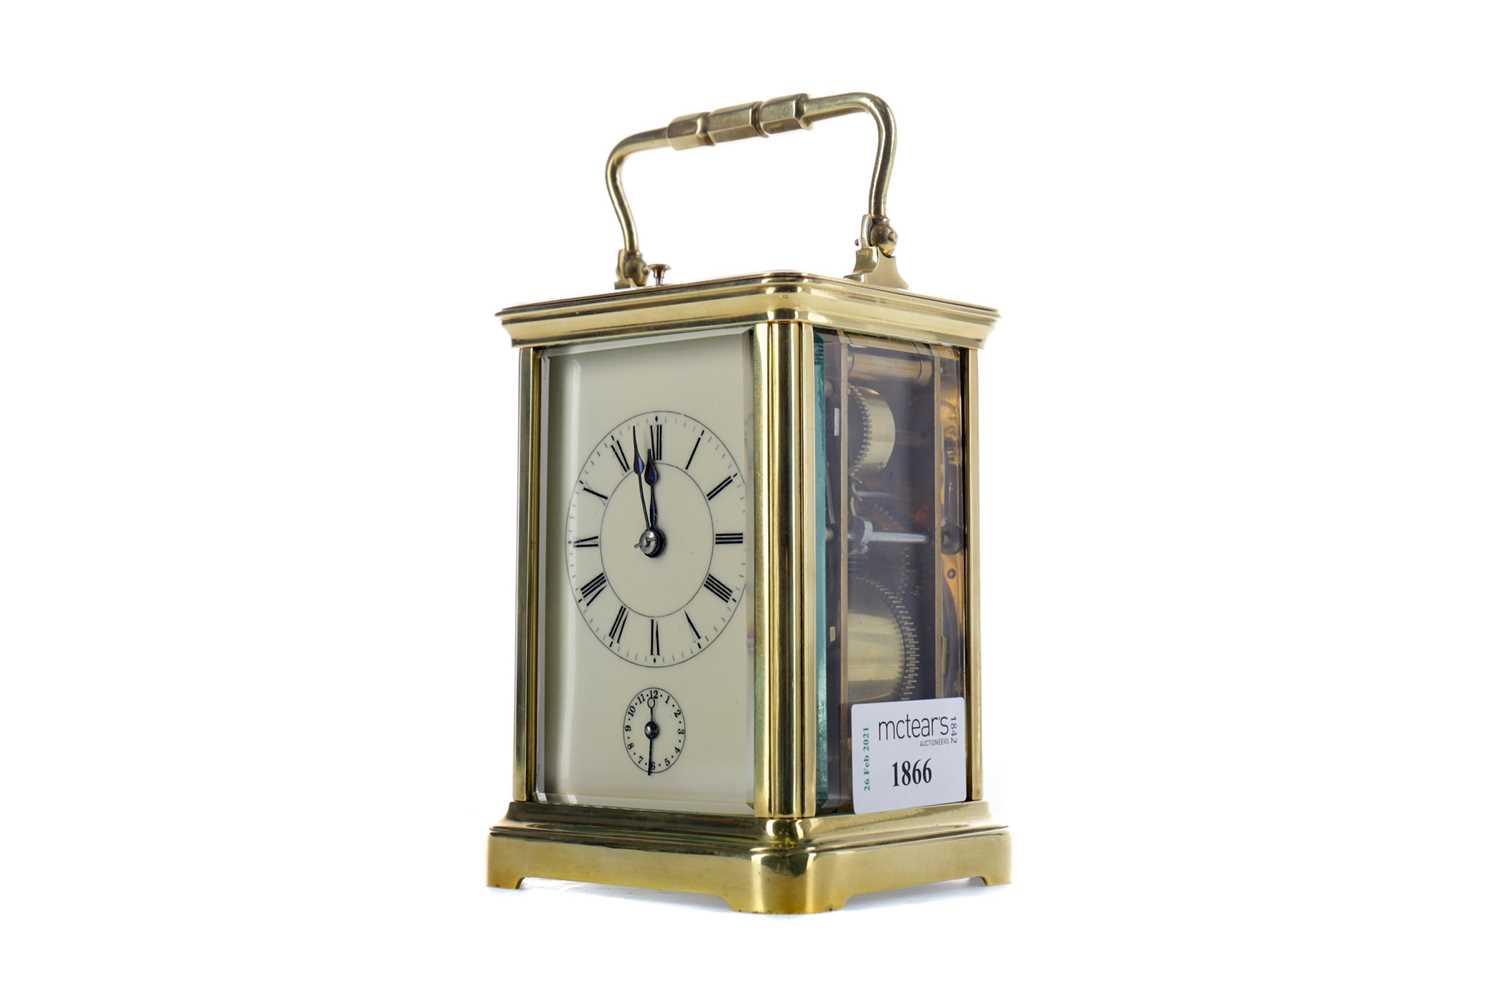 Lot 1866 - AN EARLY 20TH CENTURY REPEATER CARRIAGE CLOCK